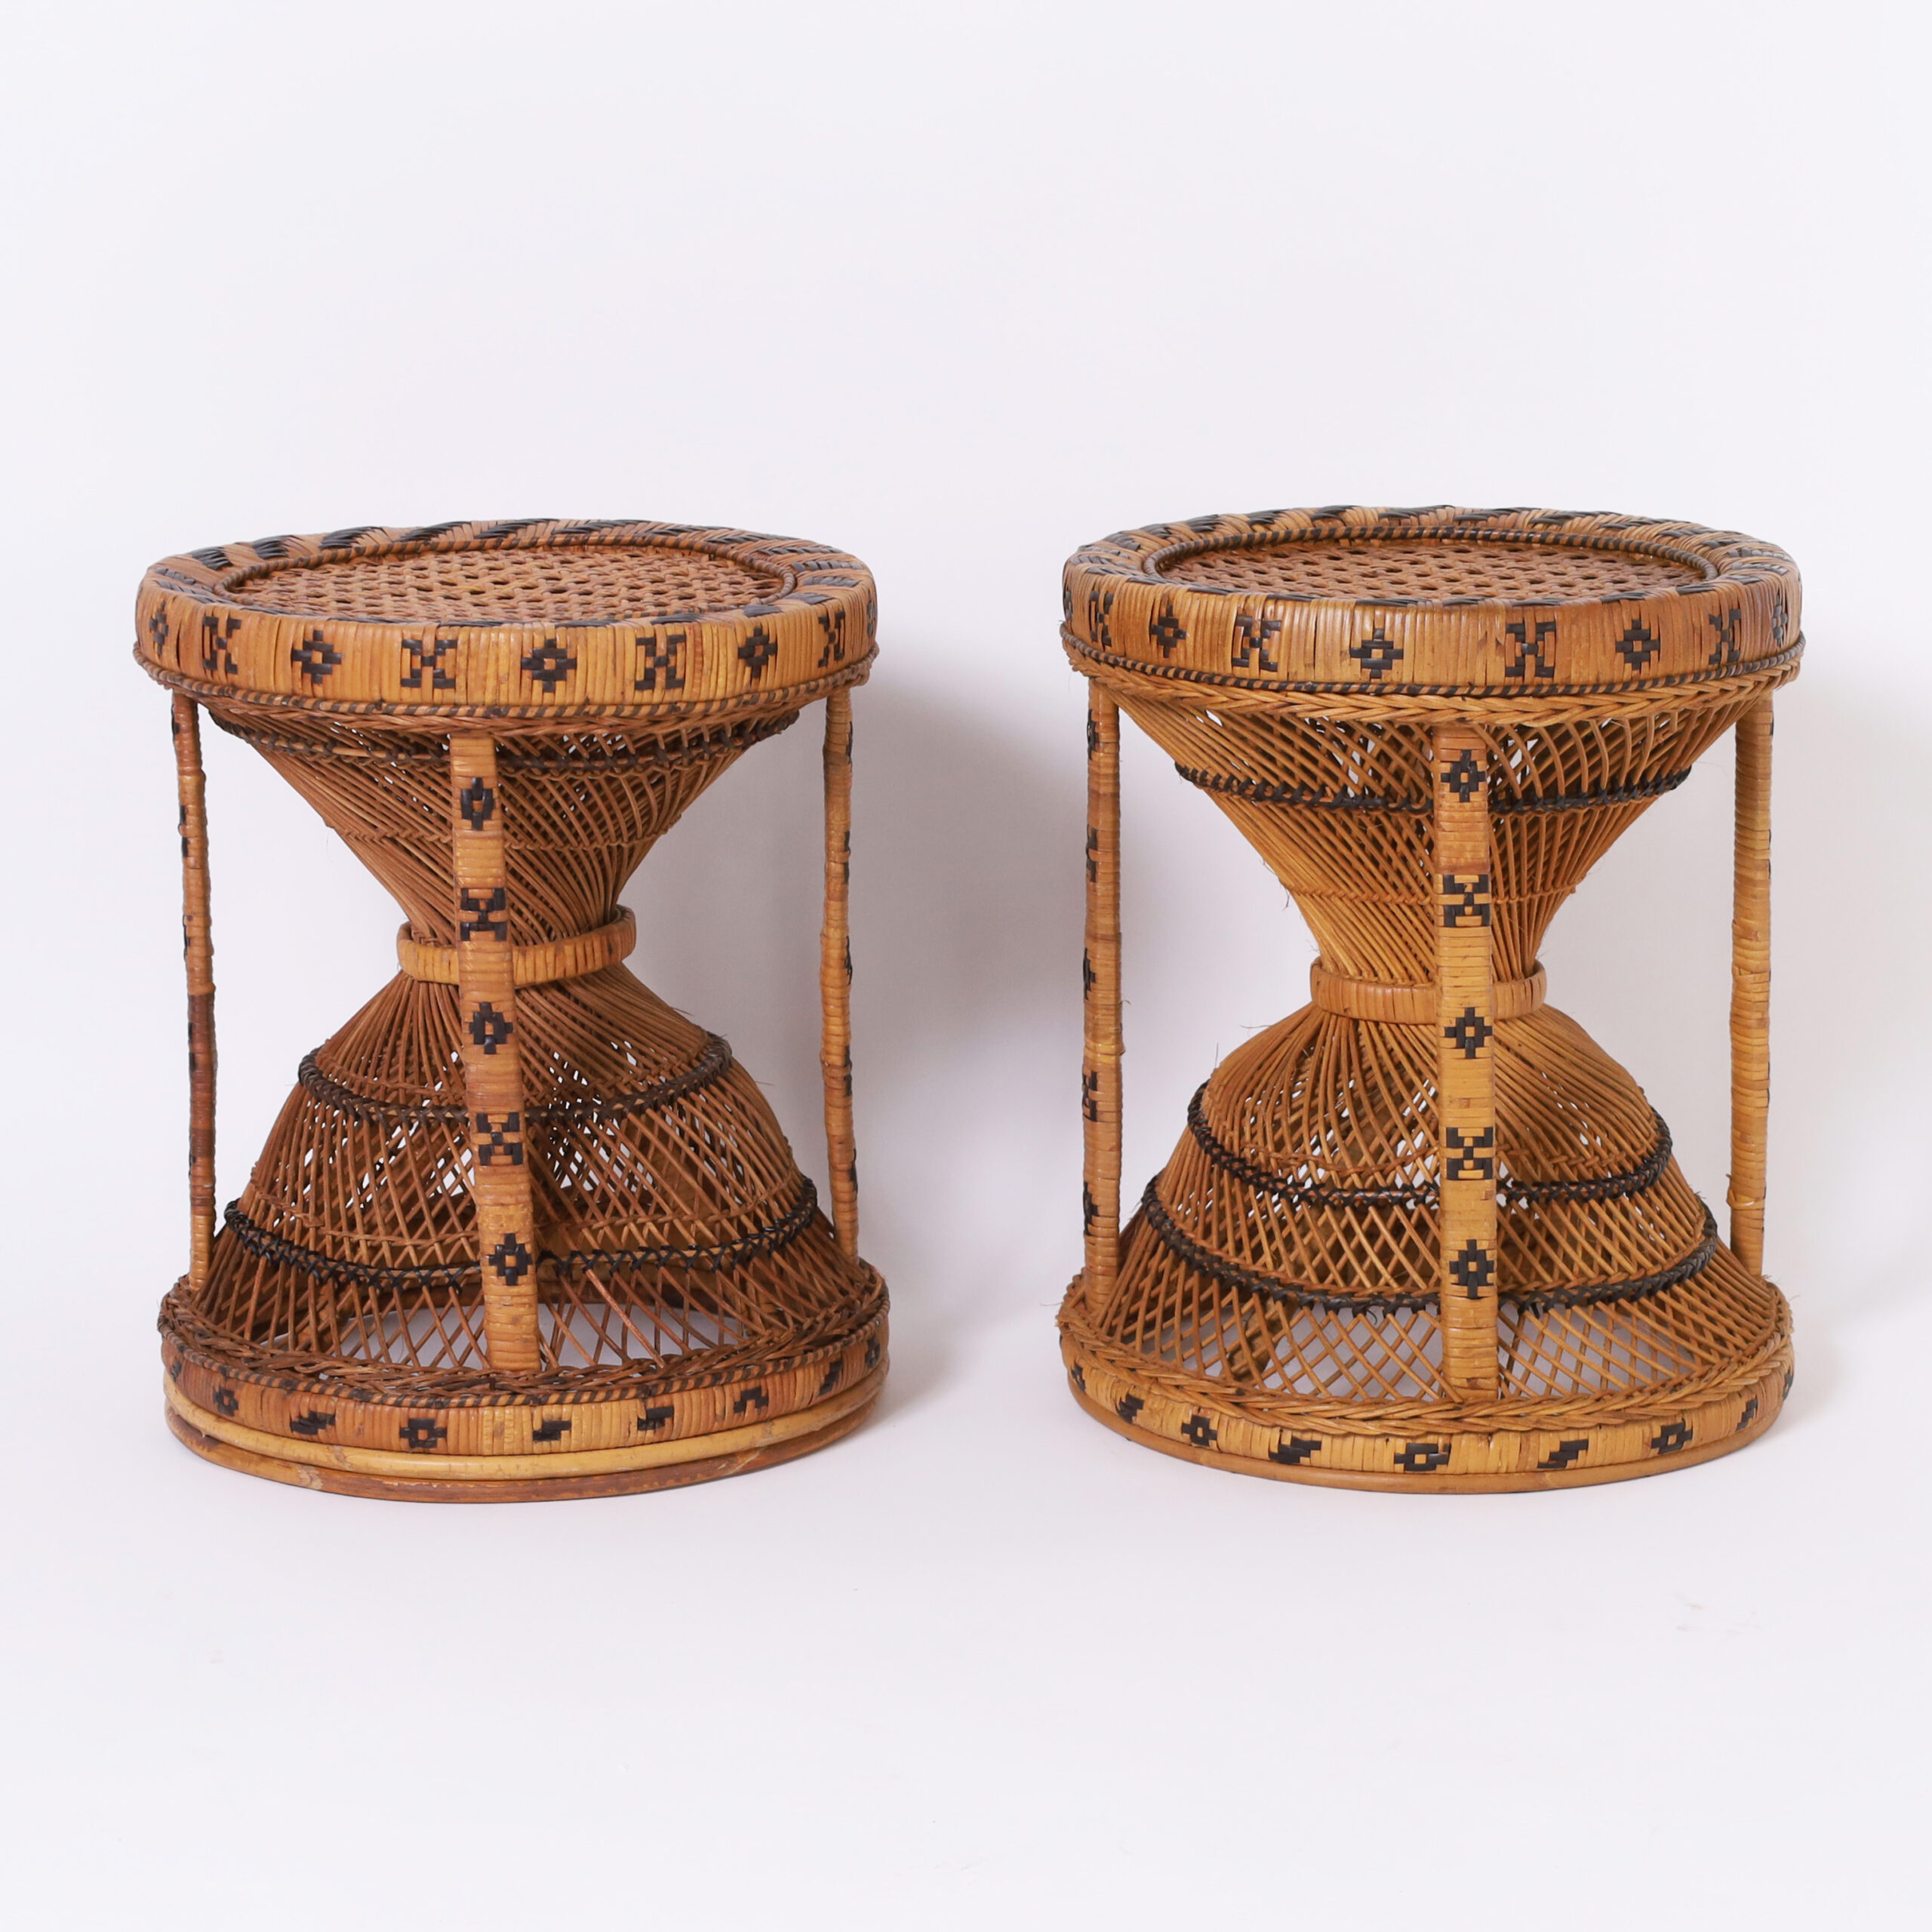 Pair of Vintage Anglo Indian Wicker Stools or Stands